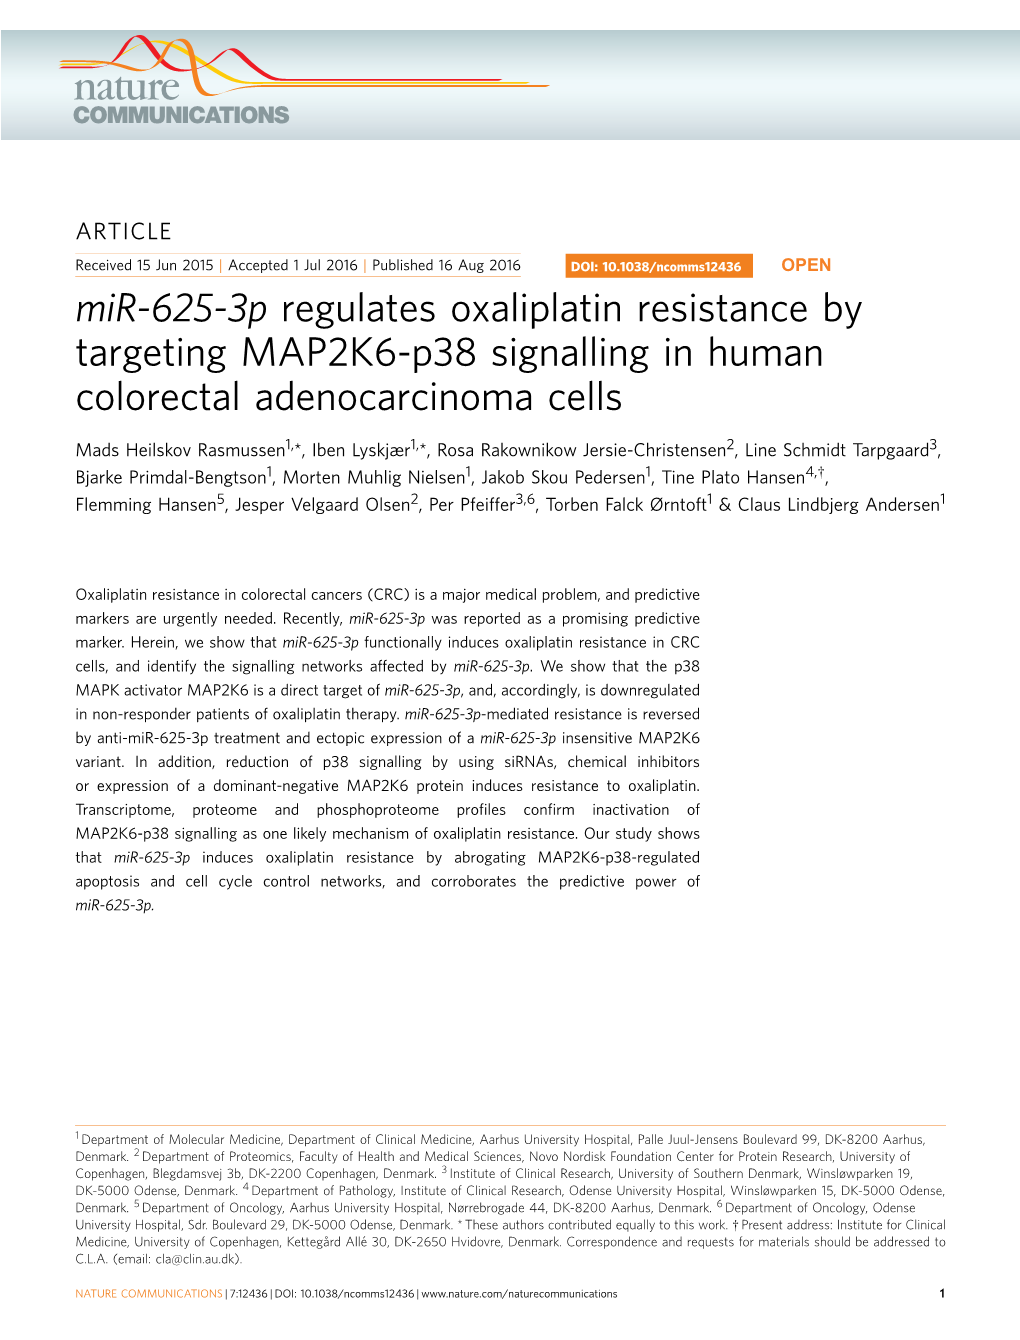 Mir-625-3P Regulates Oxaliplatin Resistance by Targeting MAP2K6-P38 Signalling in Human Colorectal Adenocarcinoma Cells